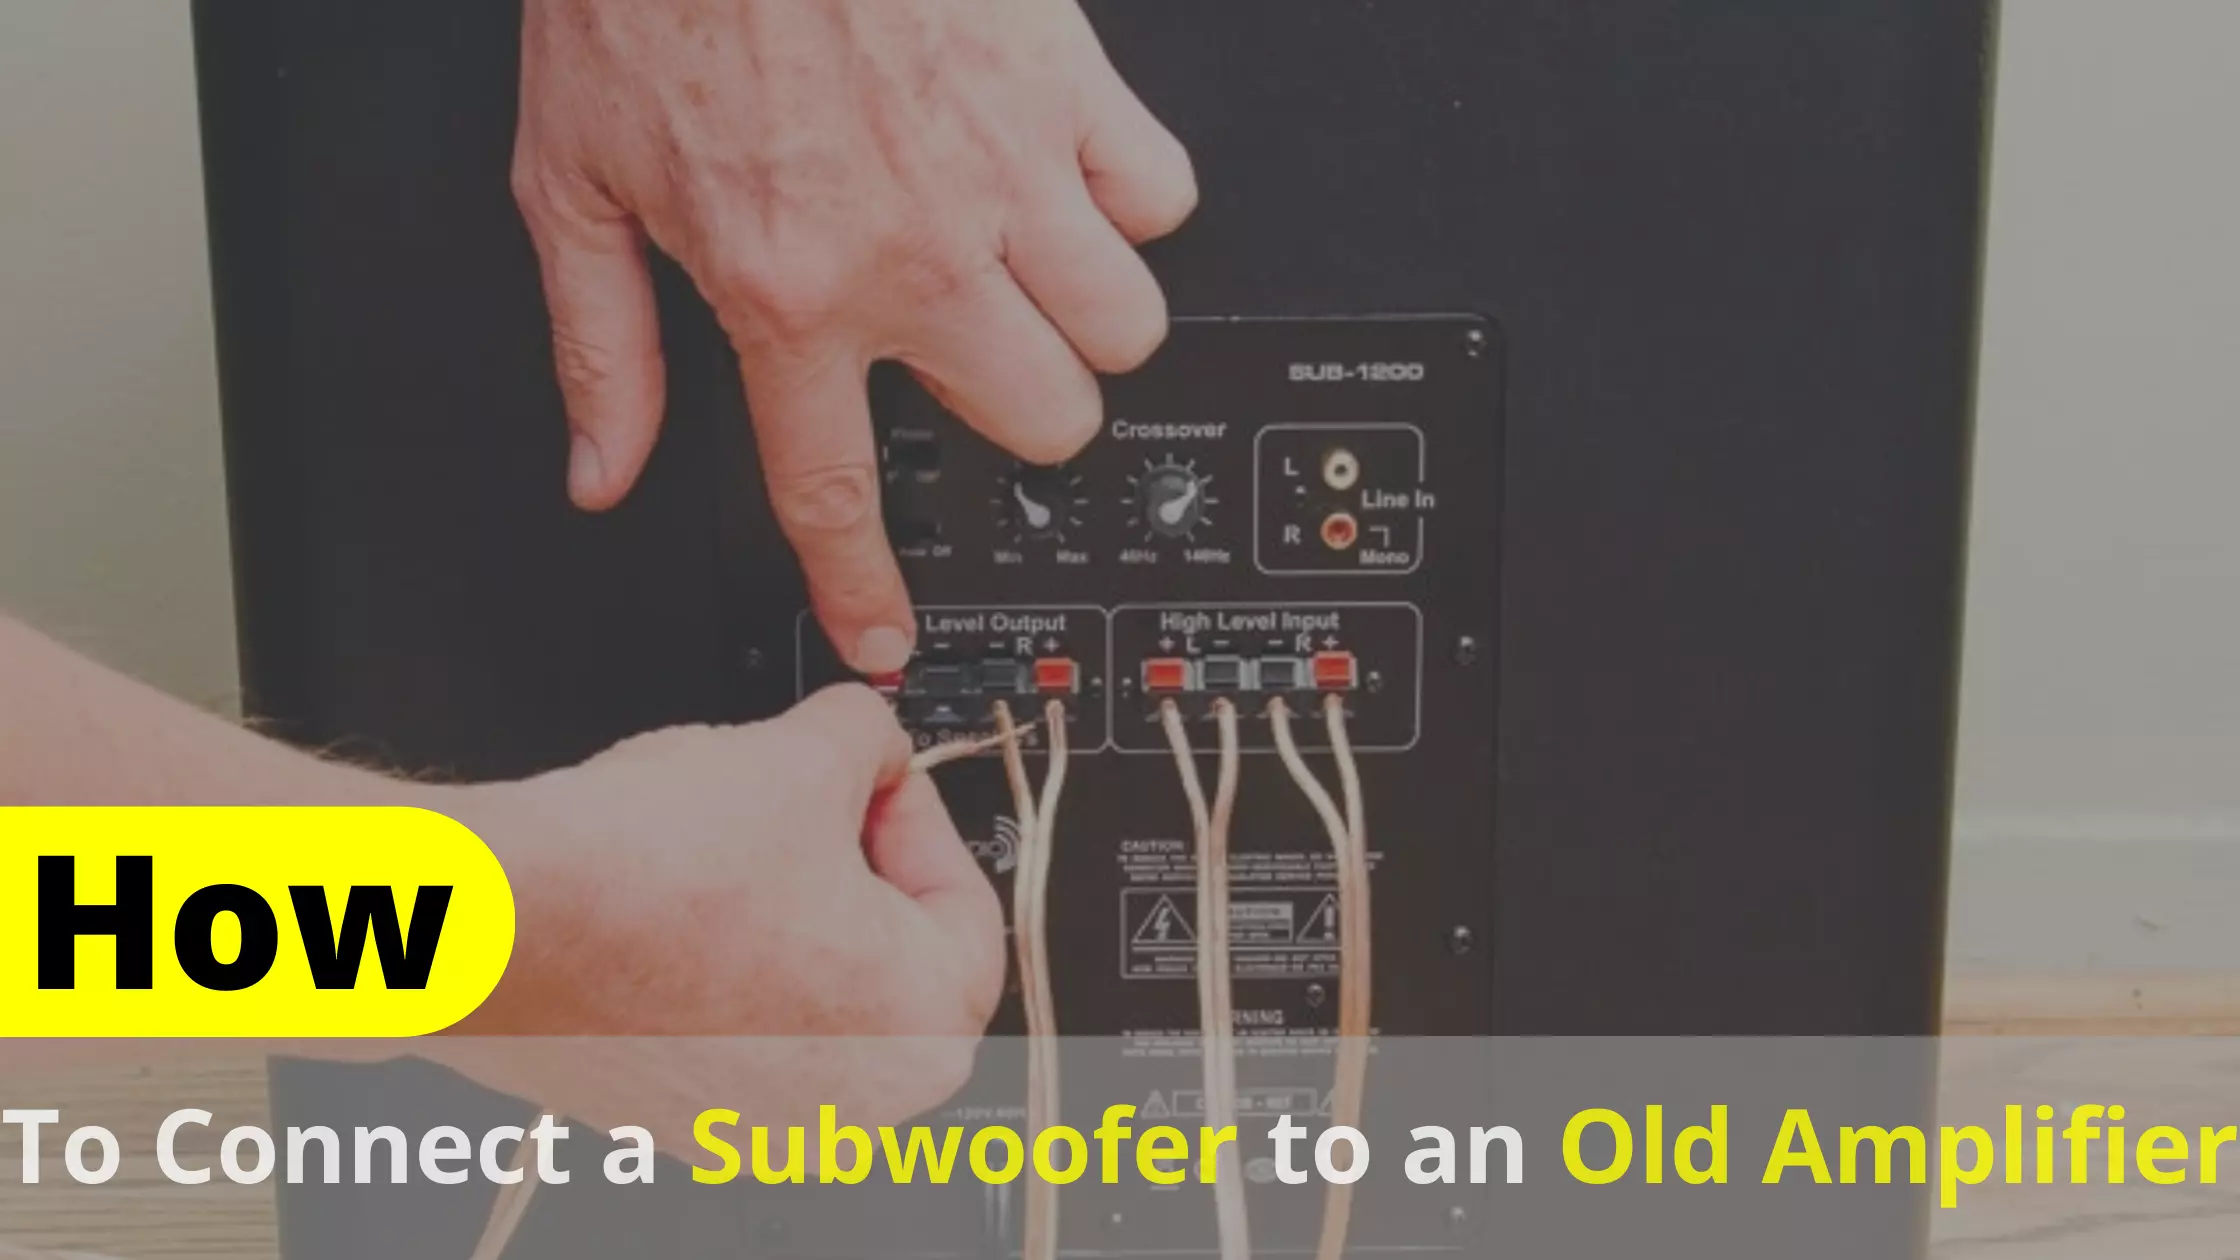 How To Connect A Subwoofer To An Old Amplifier?  